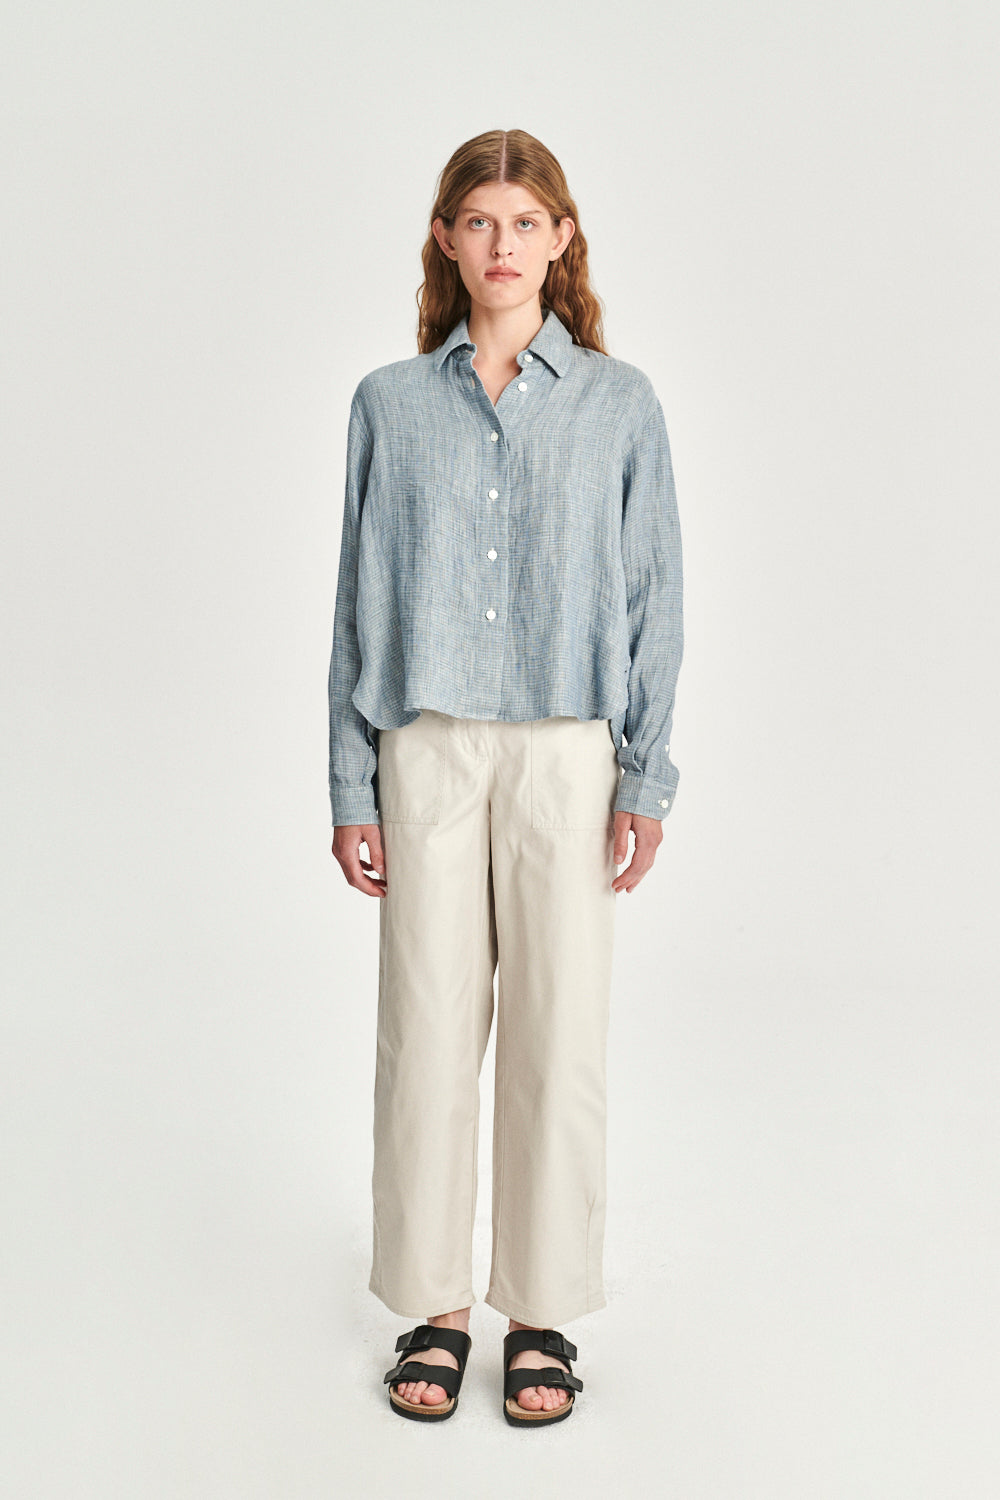 Relaxed Blouse in a Double Sided Blue and Green Italian Fatigue Linen and Cotton